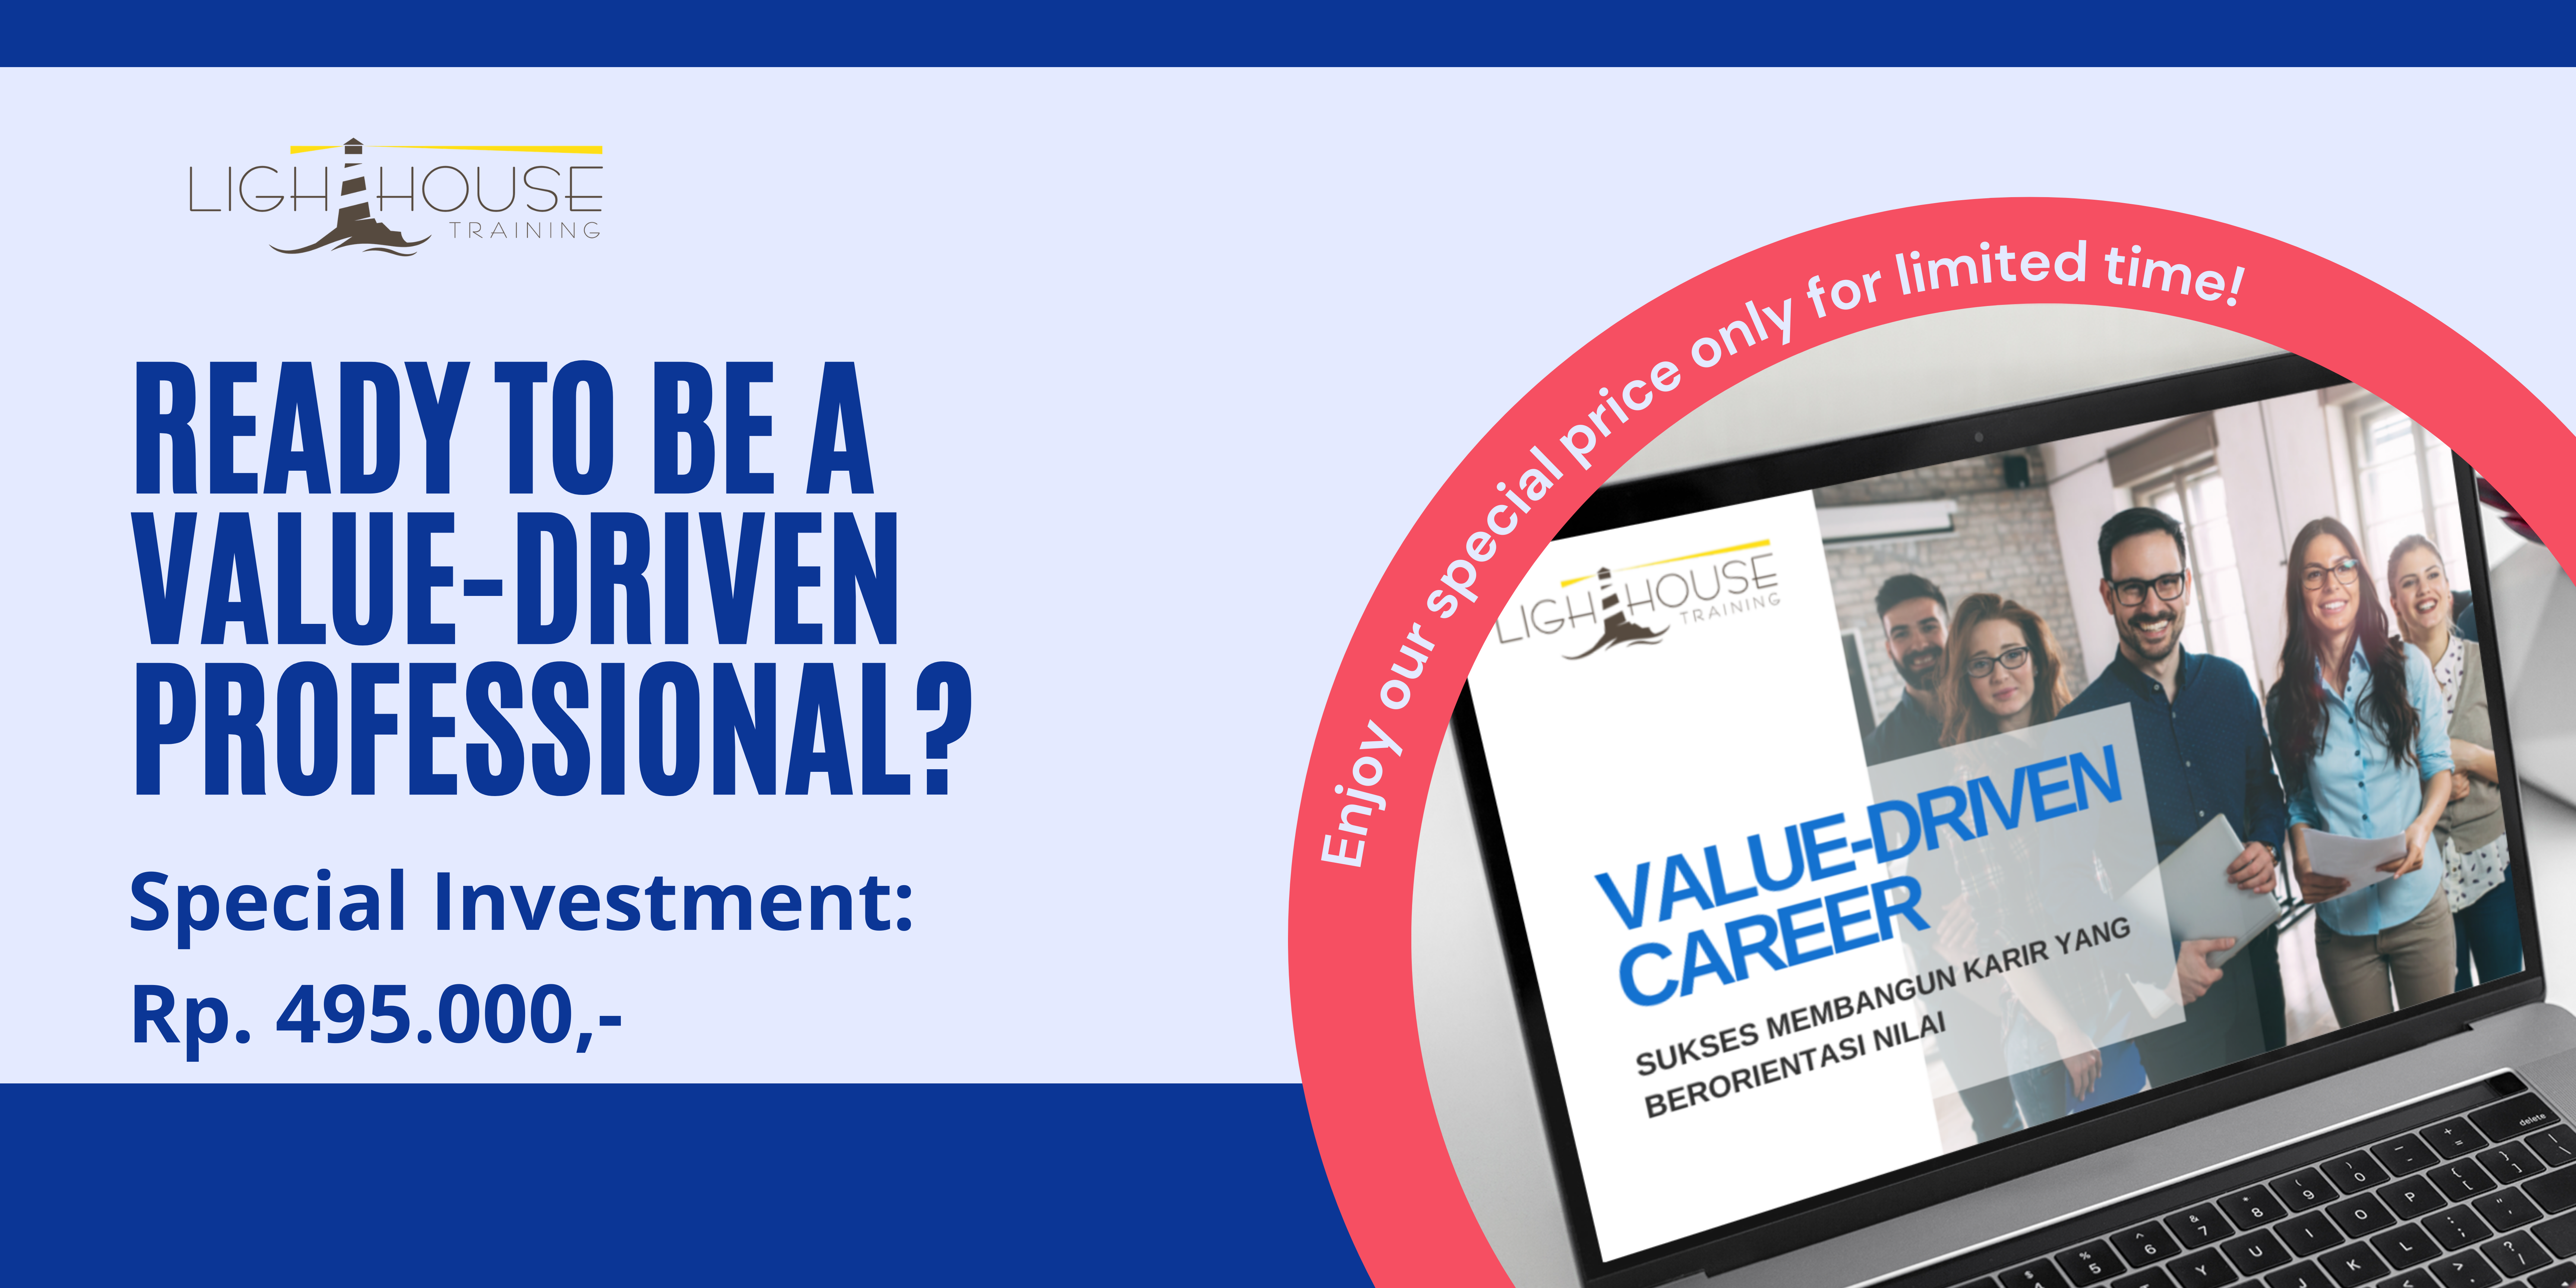 value driven career by lighthouse training